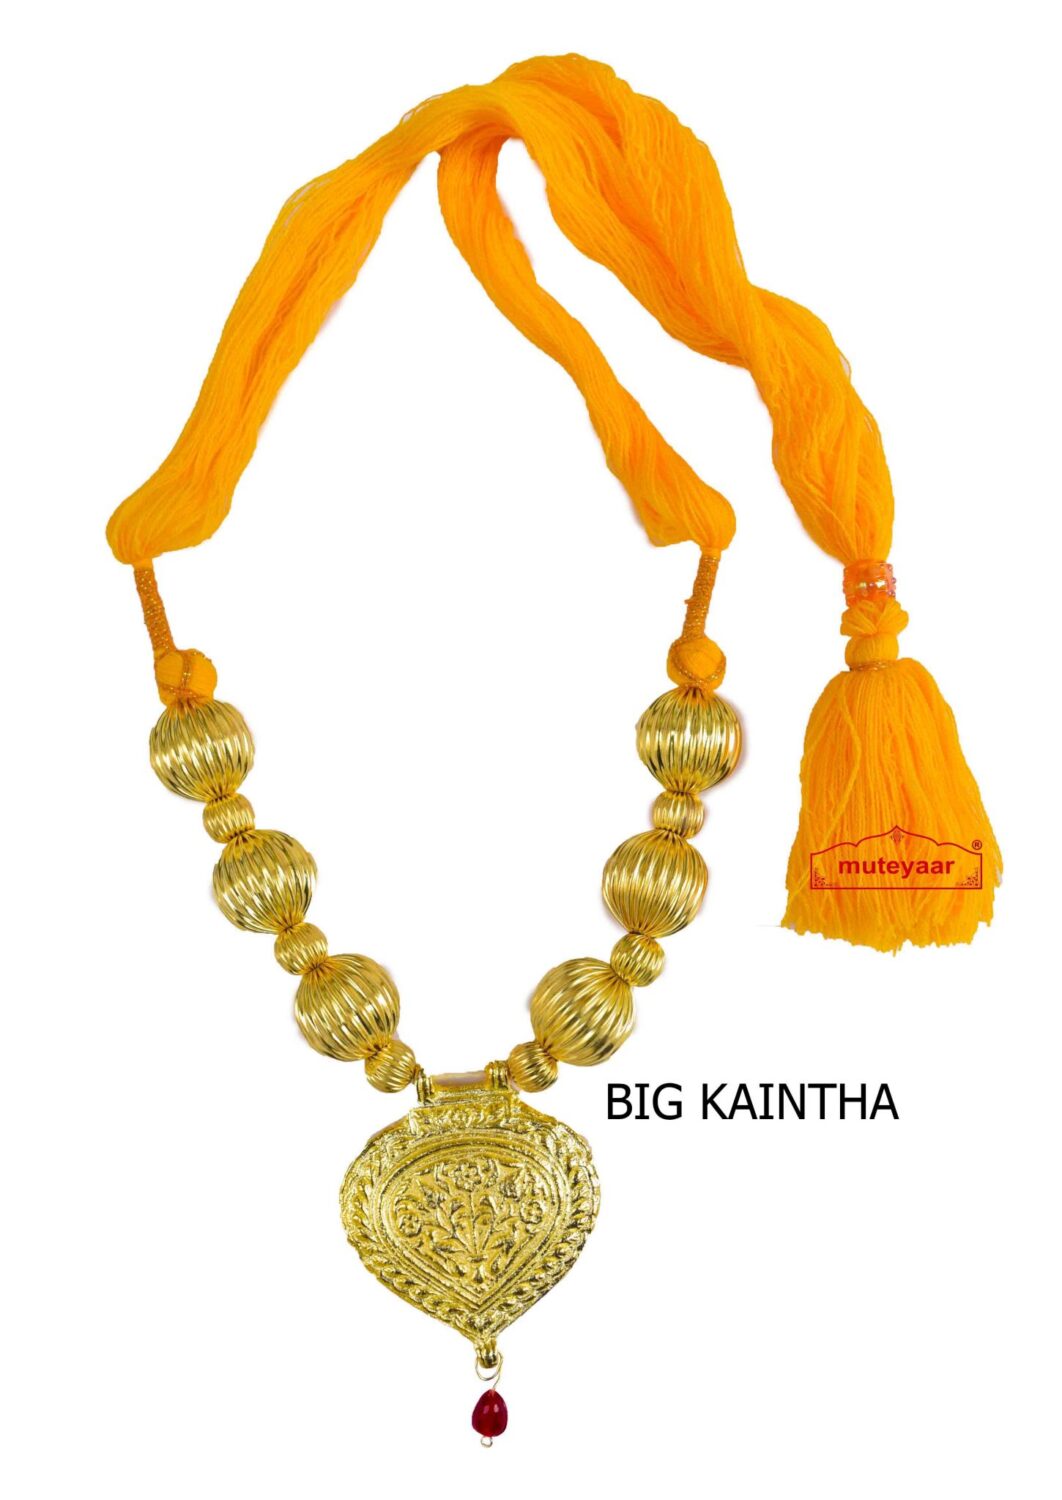 Golden Kaintha Necklace for Bhangra Giddha | Costume Jewelry 2